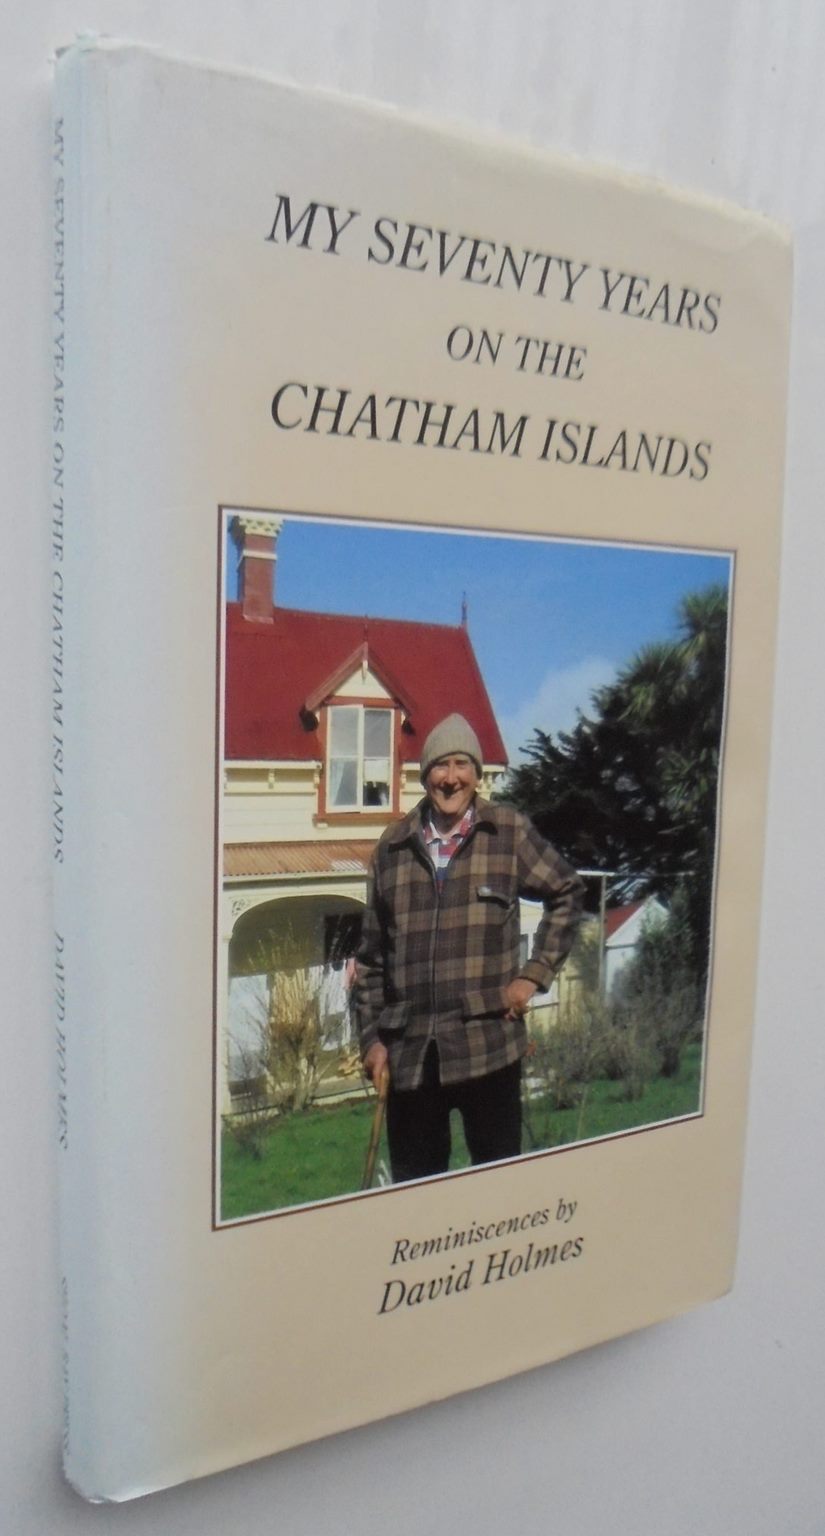 My Seventy Years on the Chatham Islands - by David Holmes. (First Edition SIGNED)